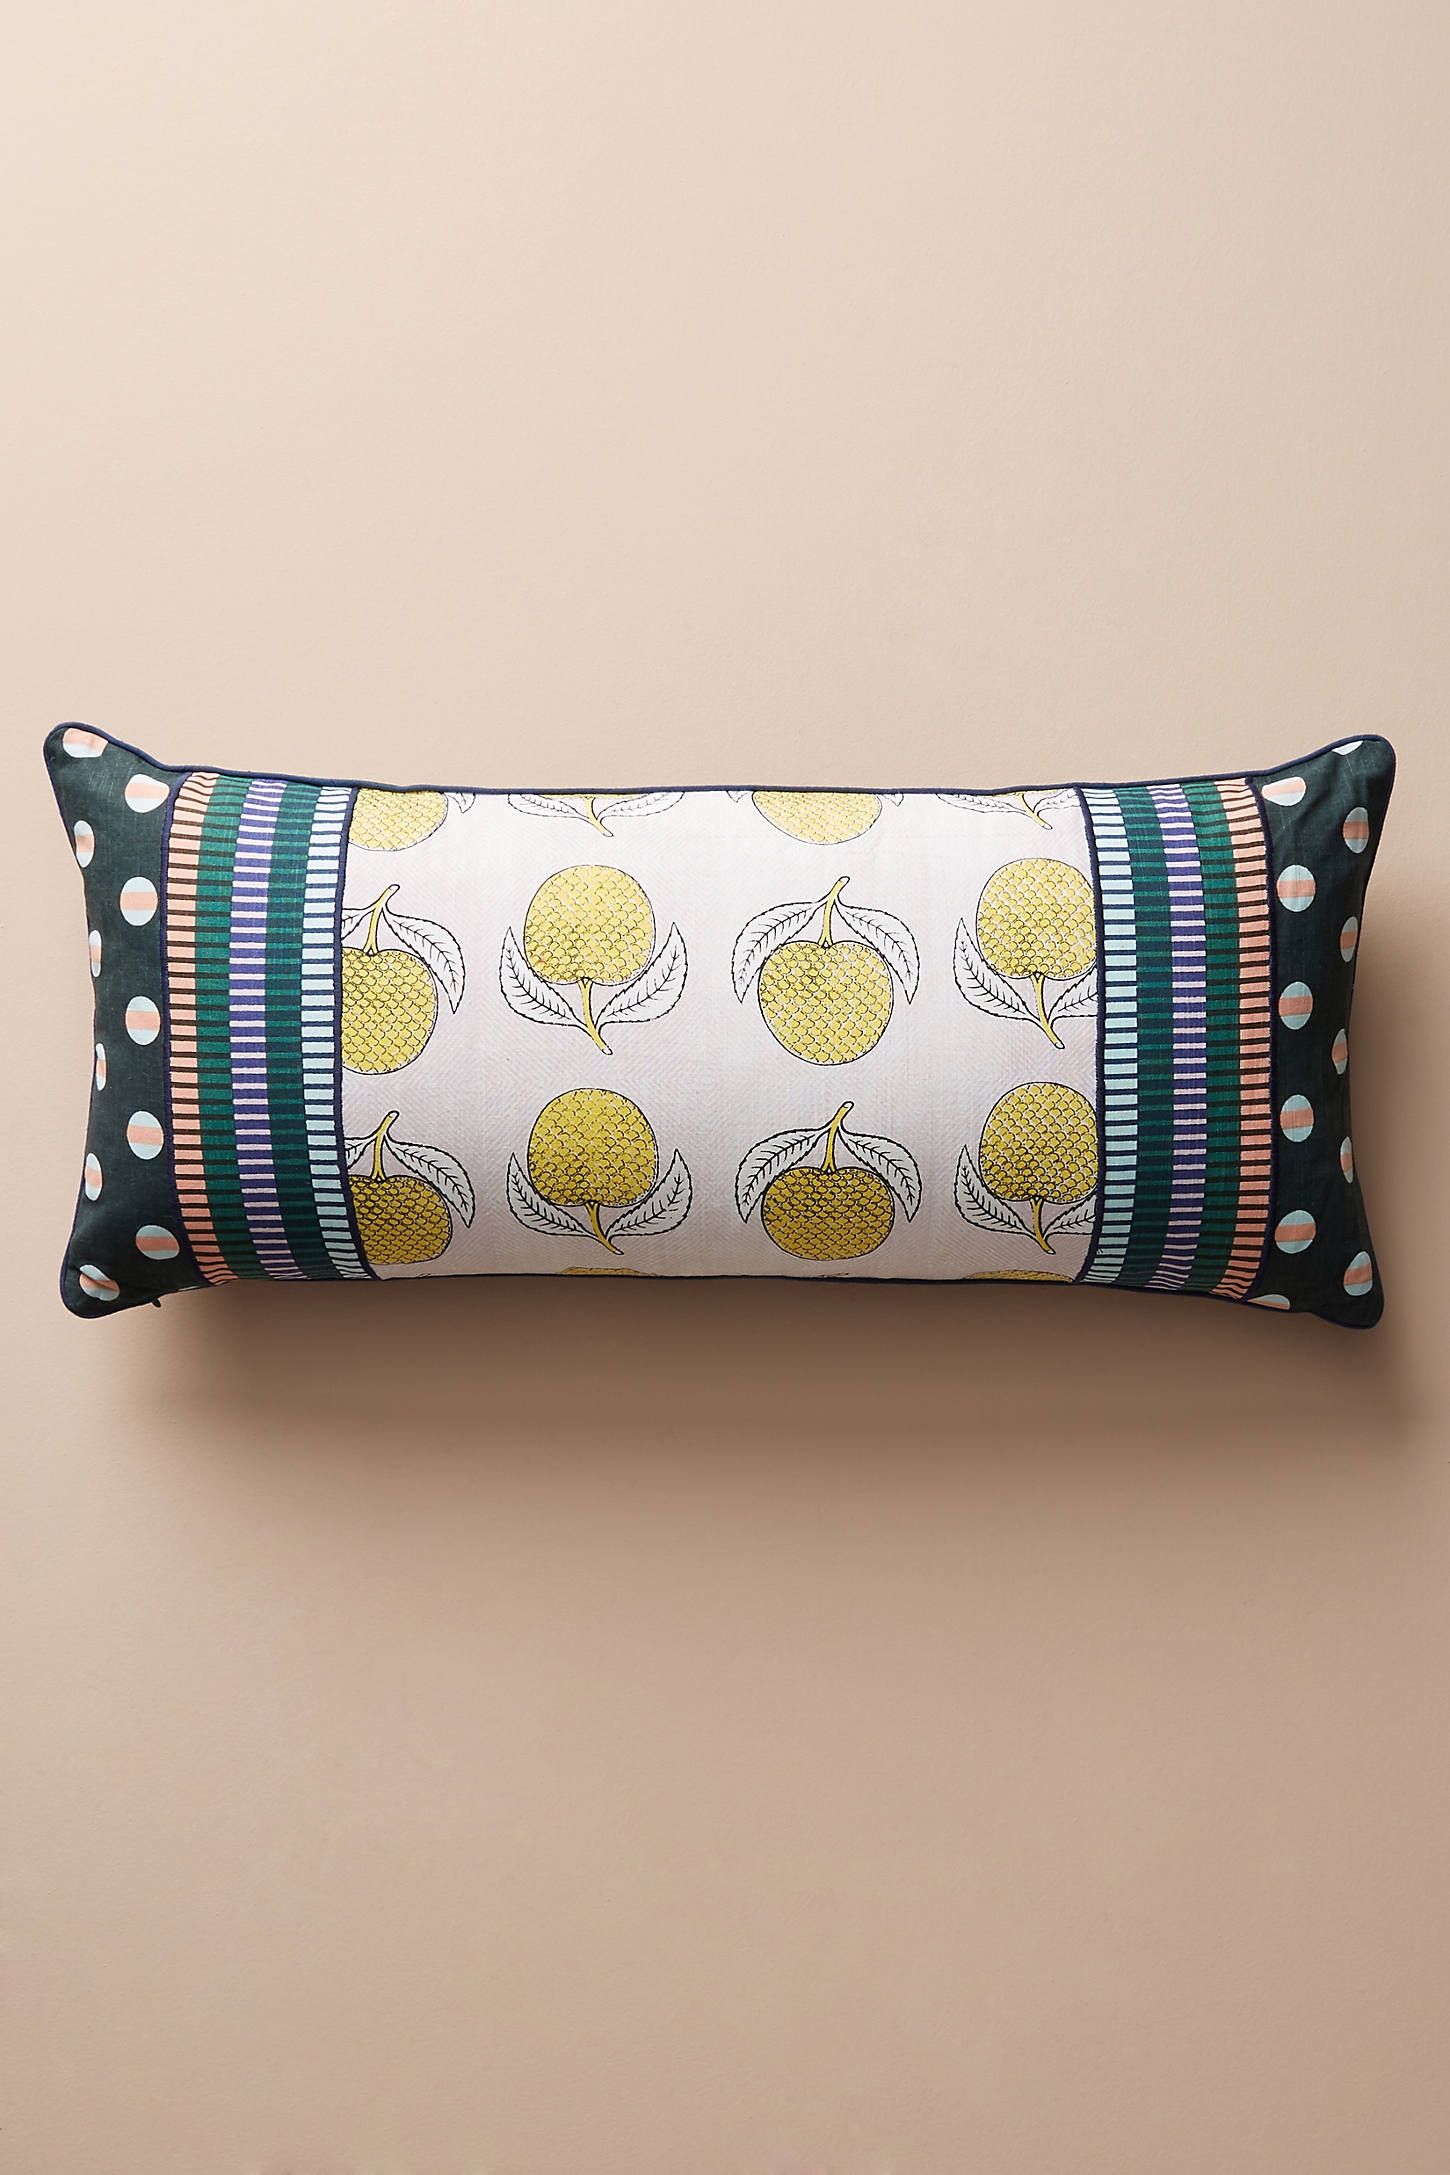 SUNO for Anthropologie Pillow - Image 0